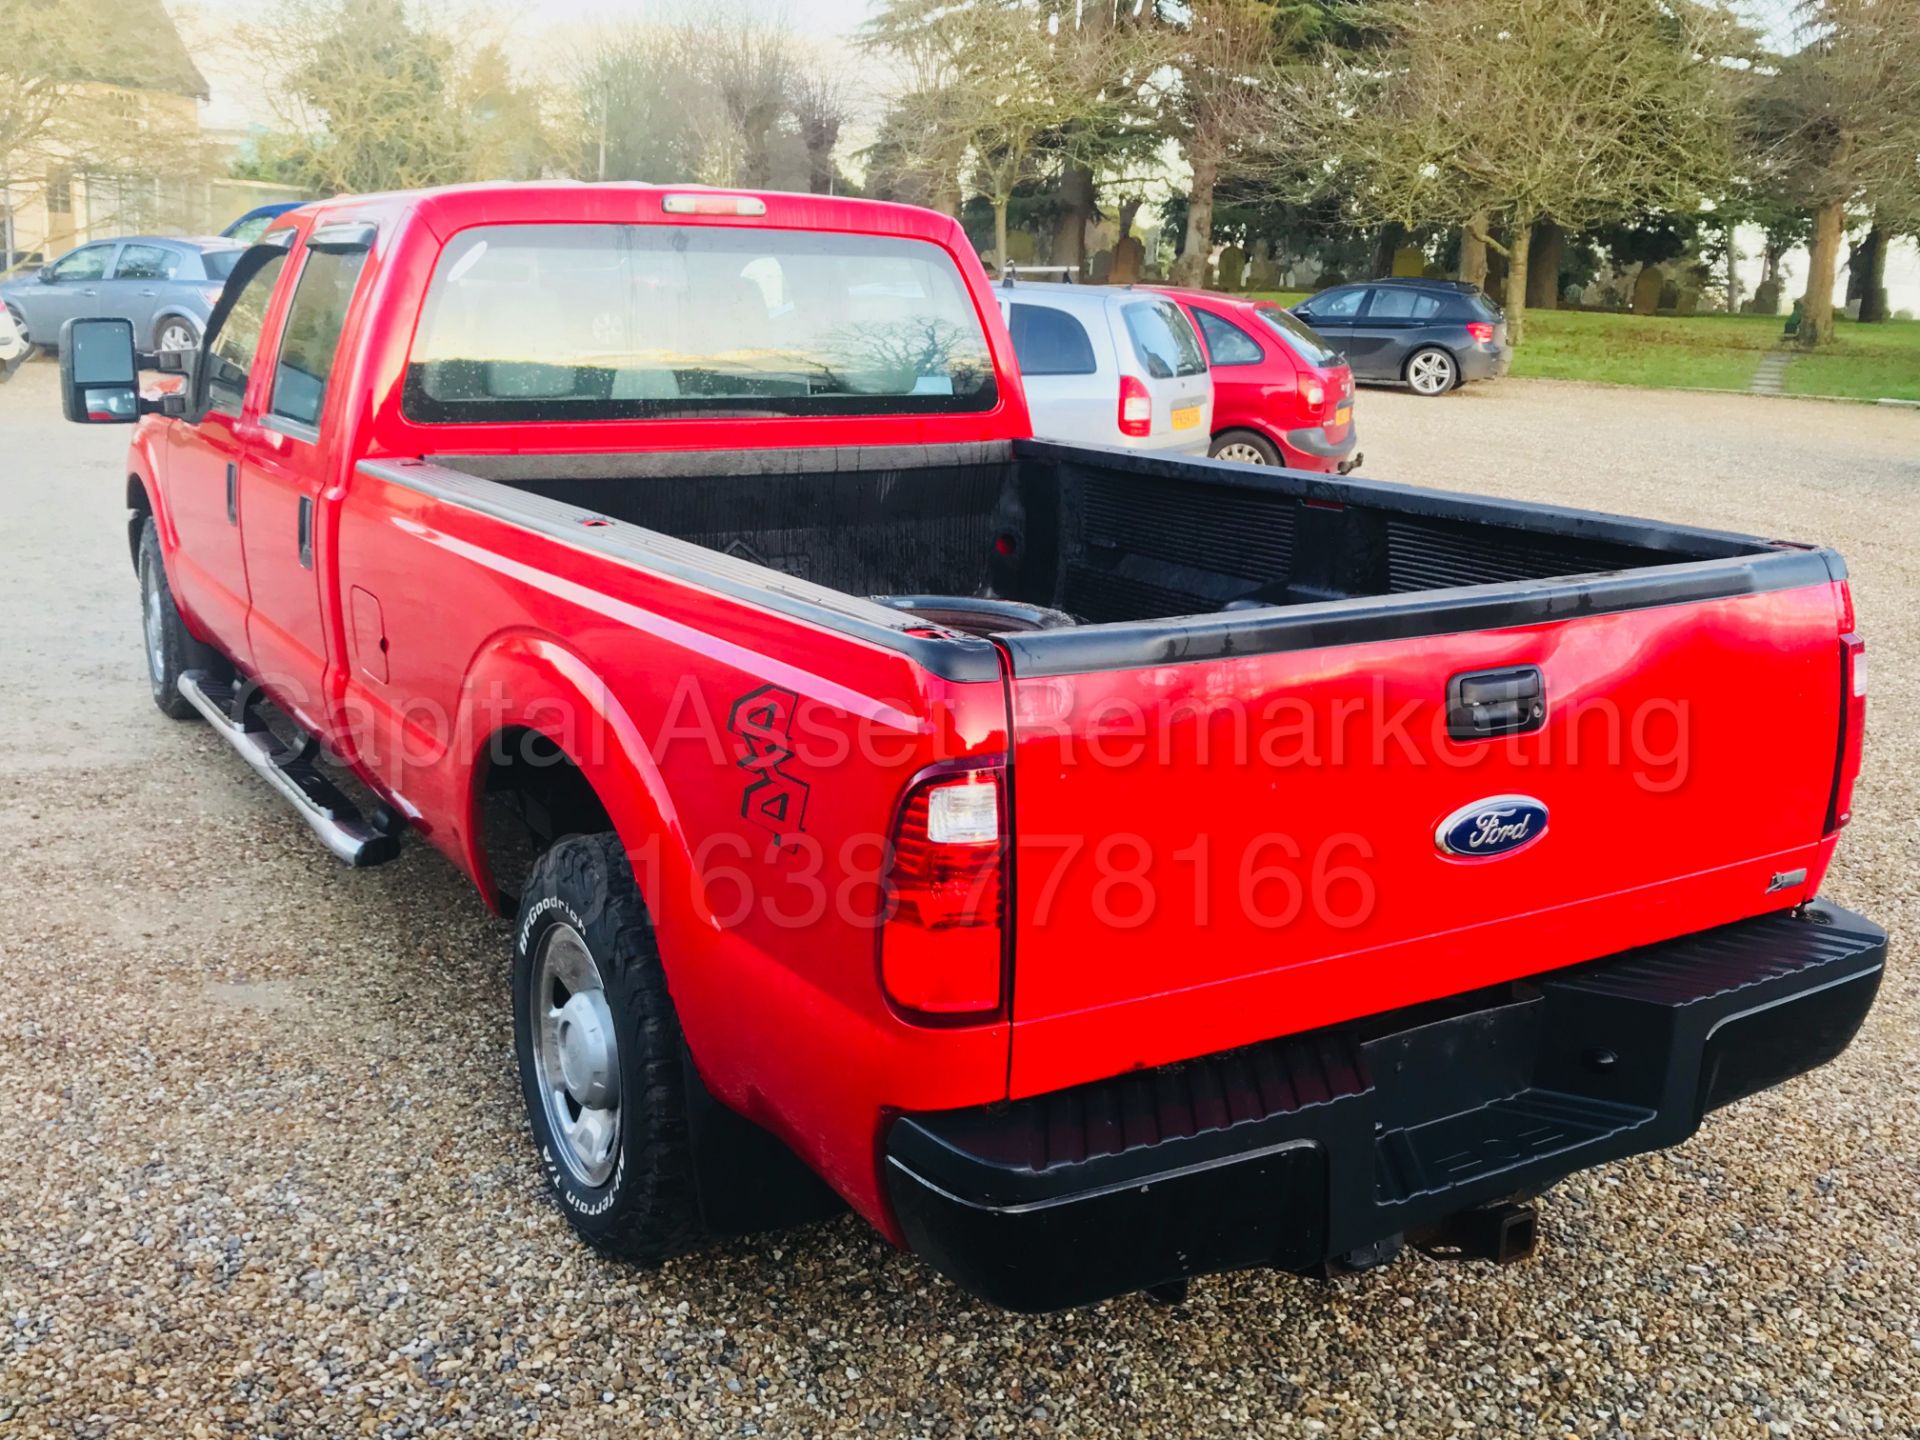 (On Sale) FORD F-250 SUPER DUTY 6.2 V8 FLEX FUEL (2011) XL - DOUBLE CAB PICK-UP **AIR CON - AUTO** - Image 12 of 27